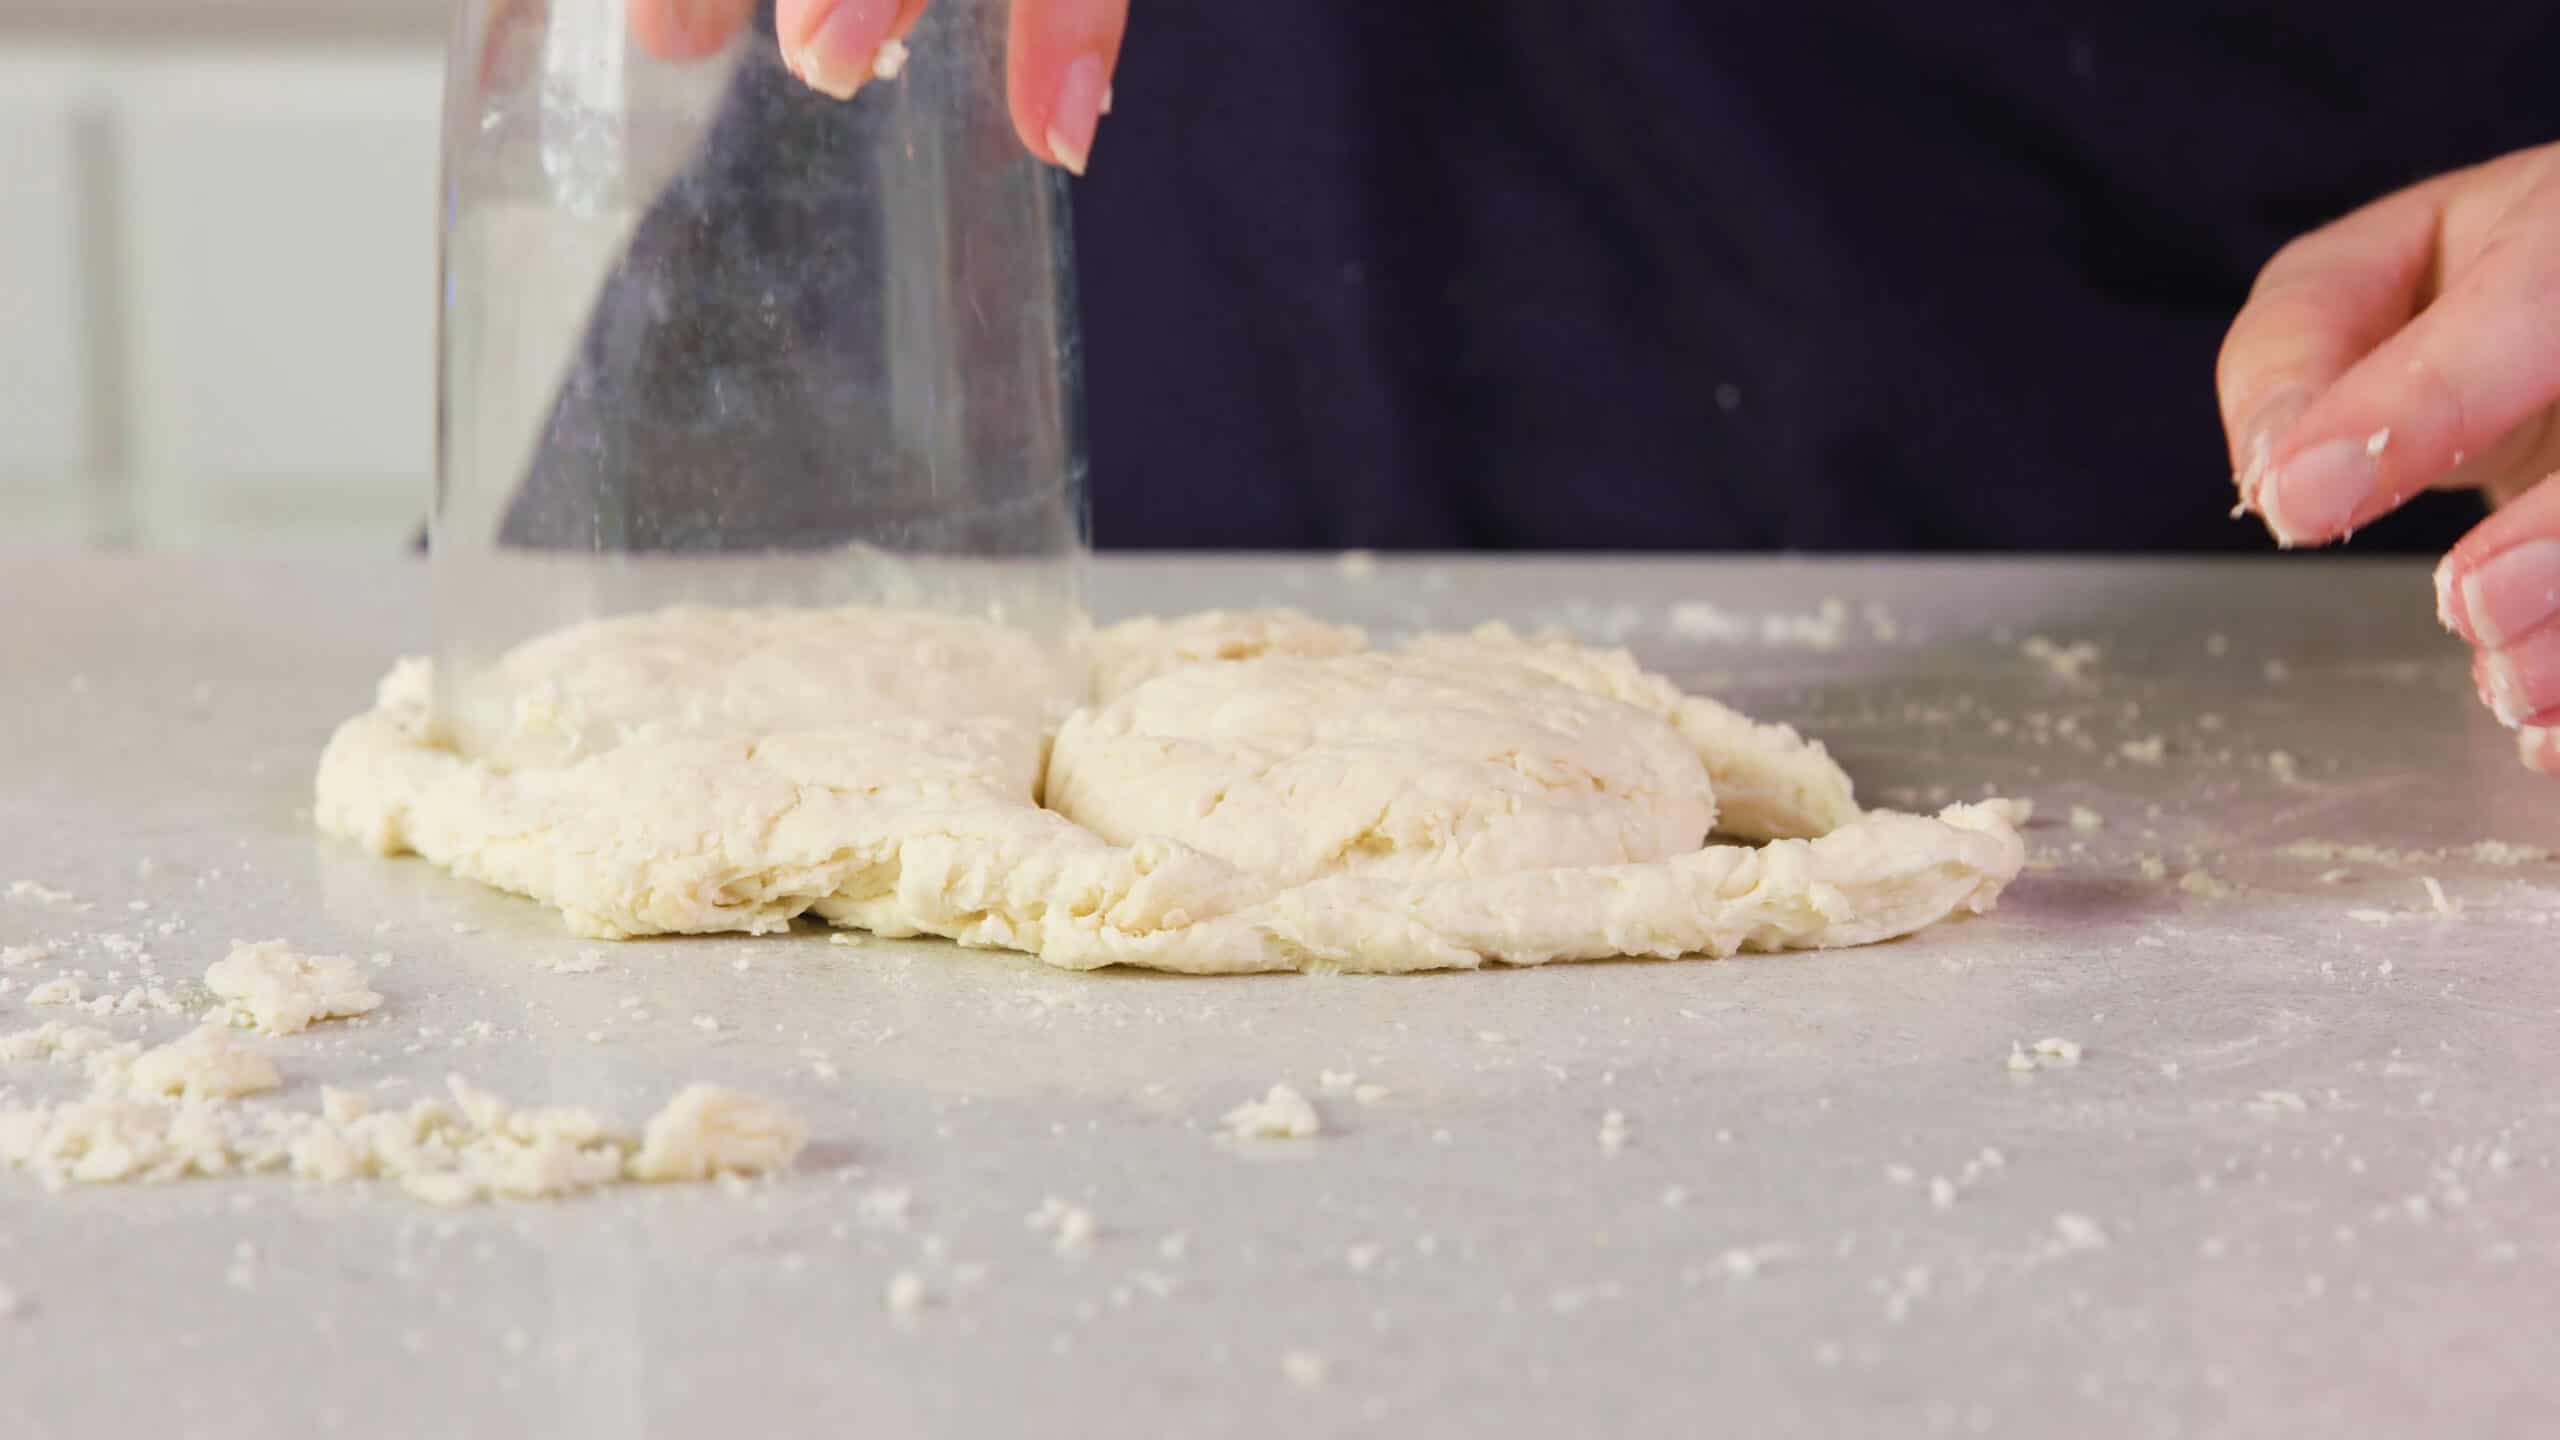 Close-up view of 8 oz glass being used to cut out two individual biscuits from remaining buttermilk biscuit dough on a clean countertop.